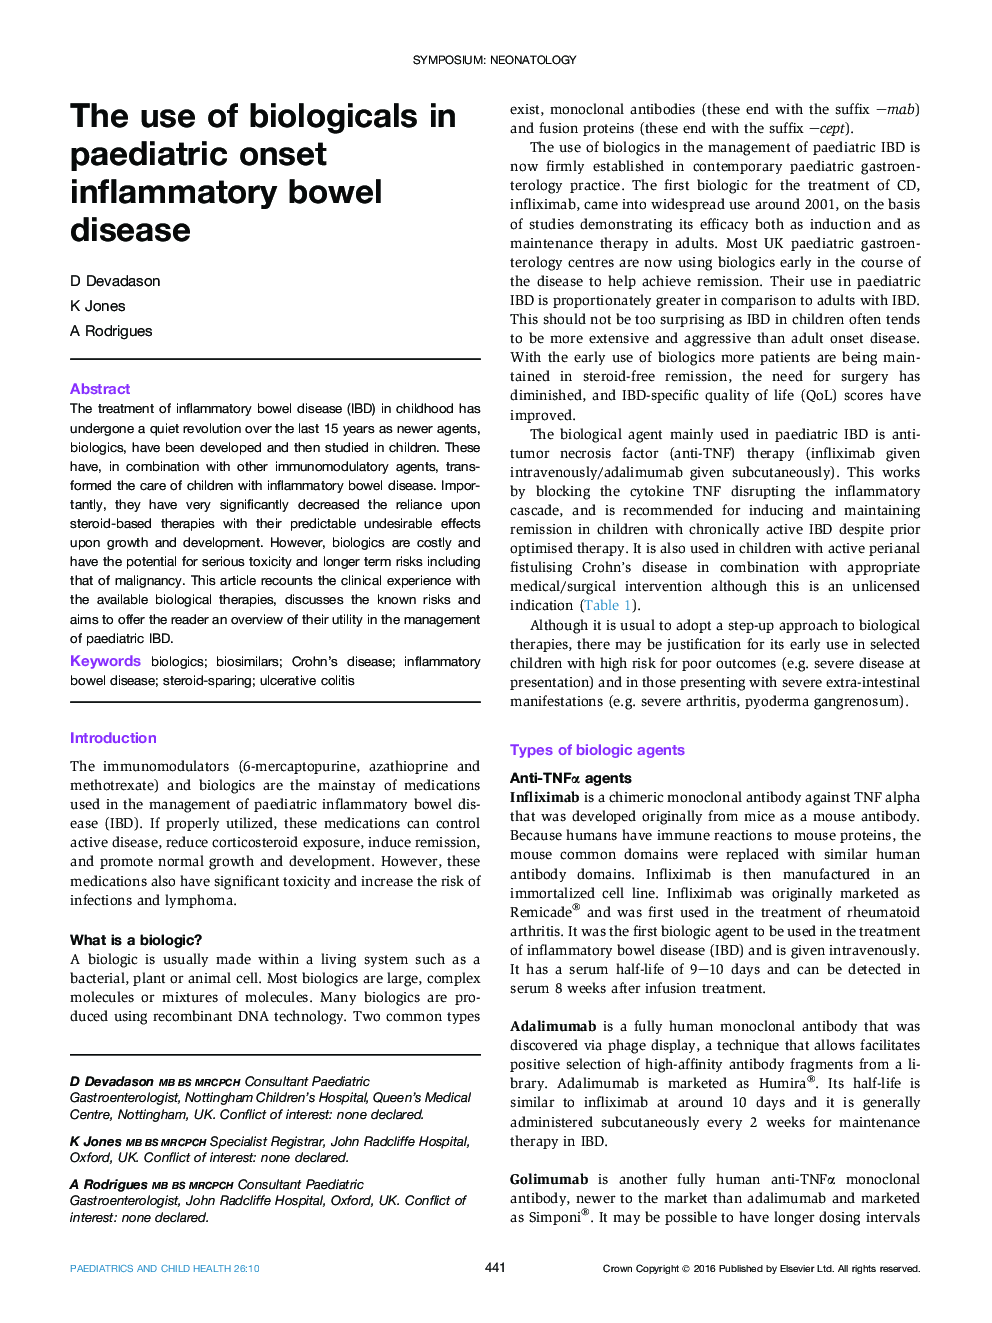 The use of biologicals in paediatric onset inflammatory bowel disease